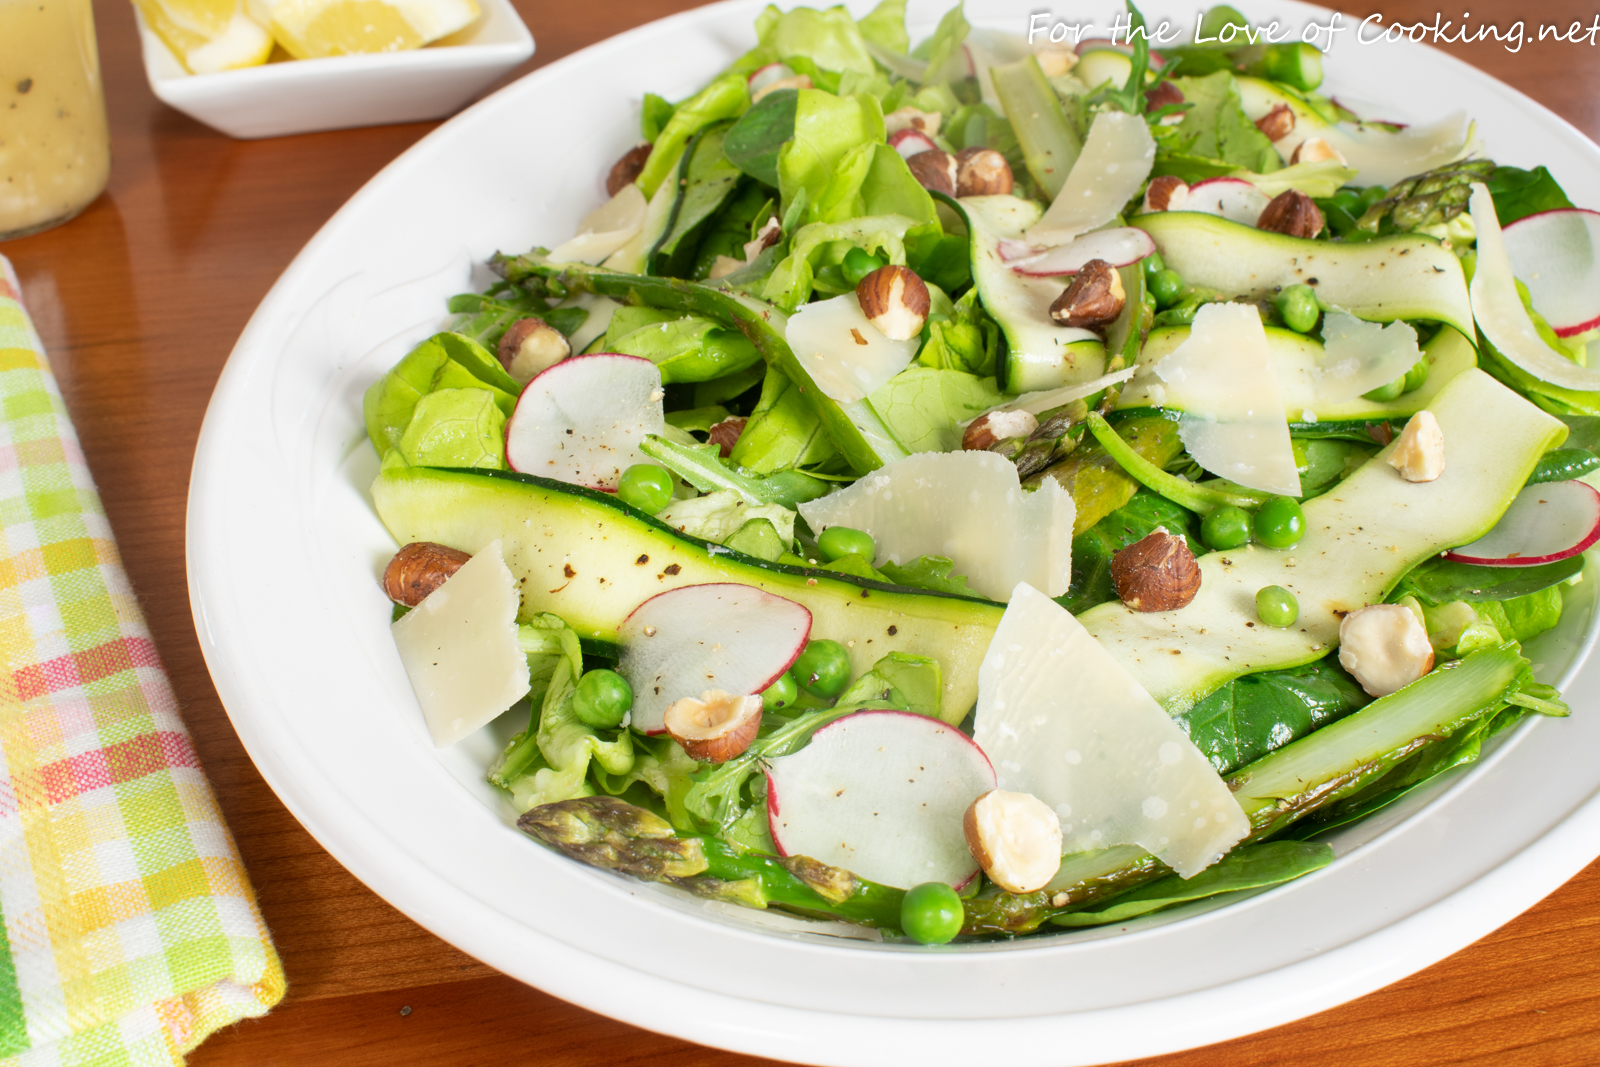 Spring Salad with Asparagus, Zucchini, and Hazelnuts with a Lemon Vinaigrette